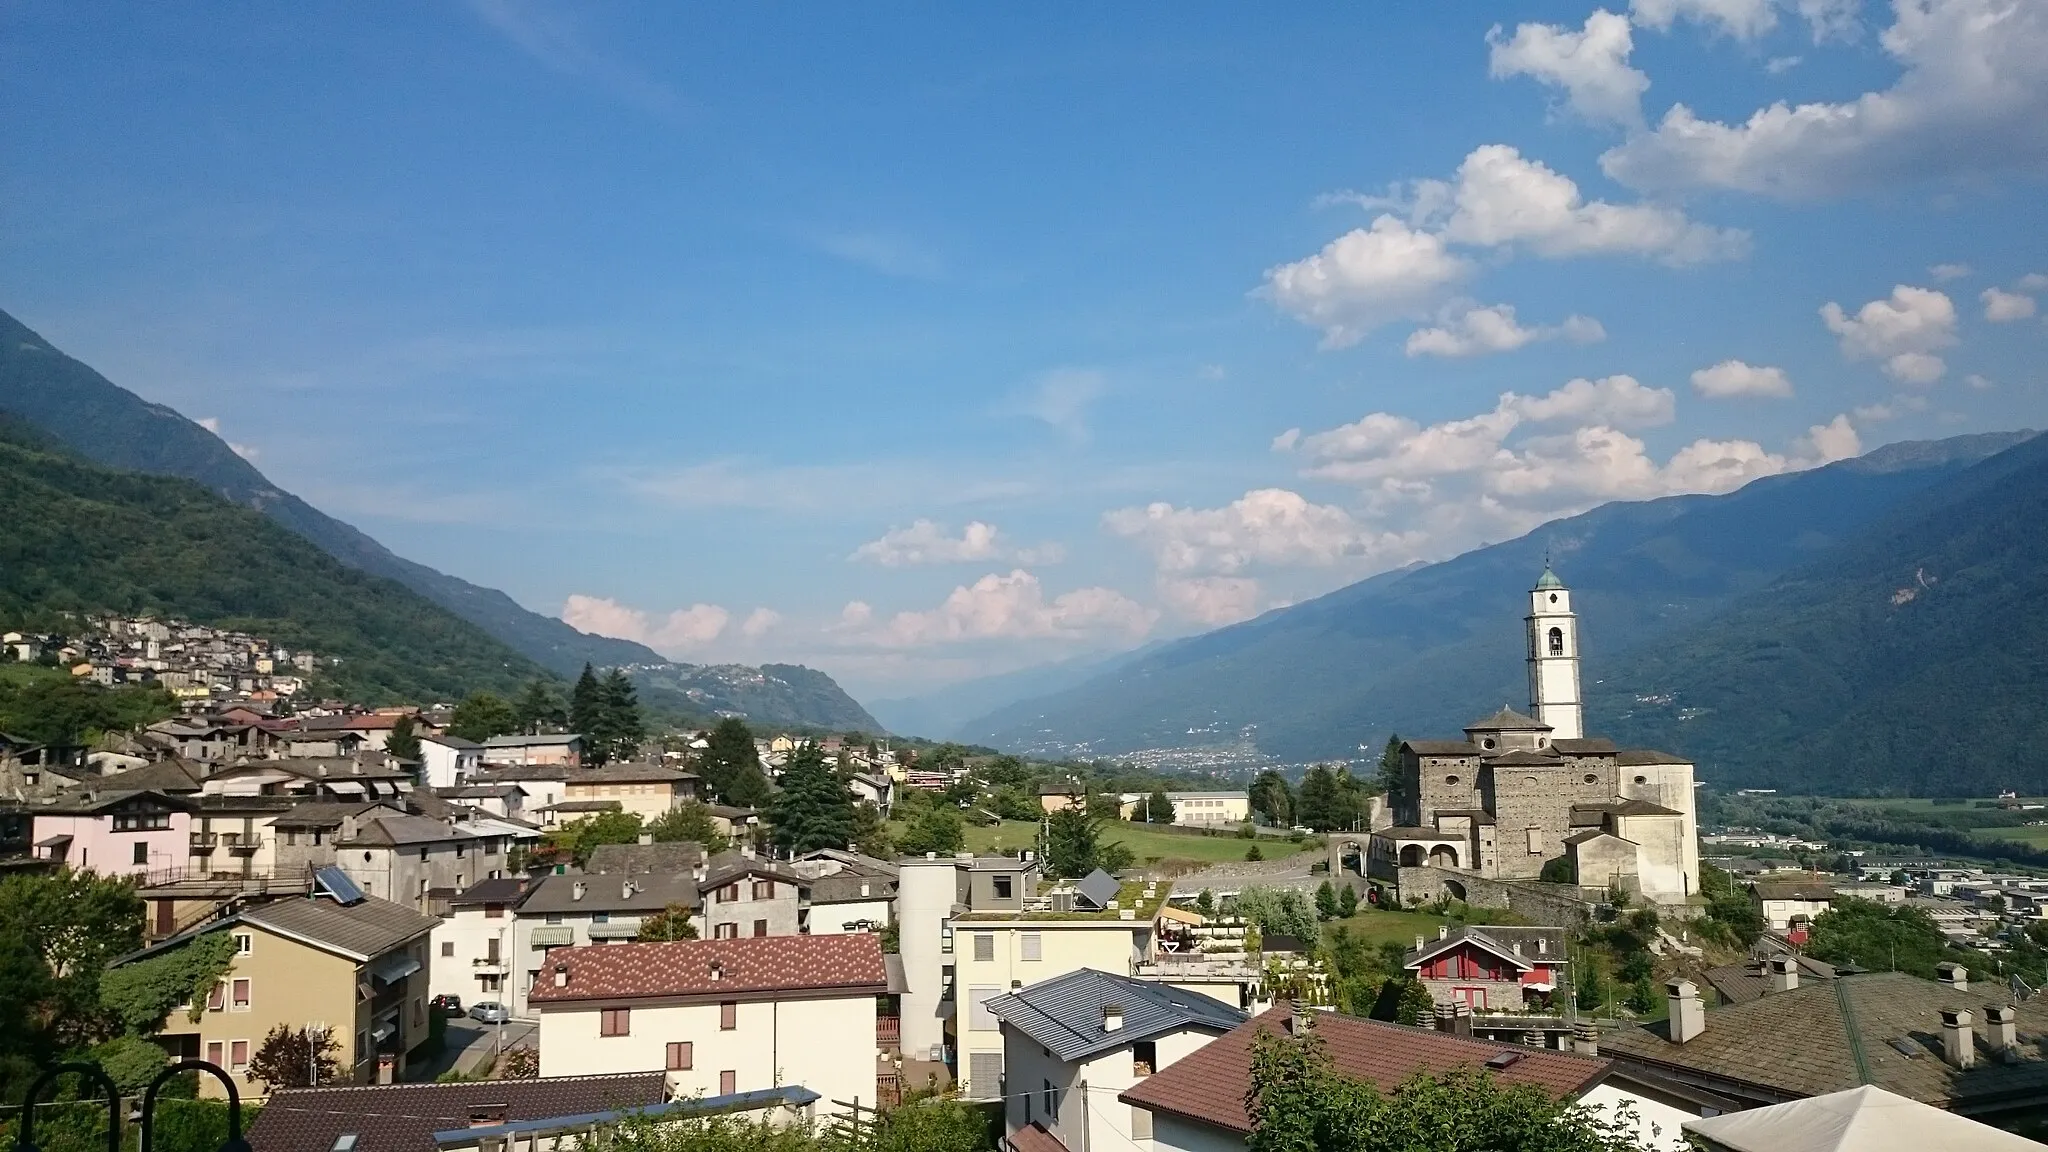 Photo showing: Berbenno di Valtellina is a town in province of Bergamo, Lombardy, Italy